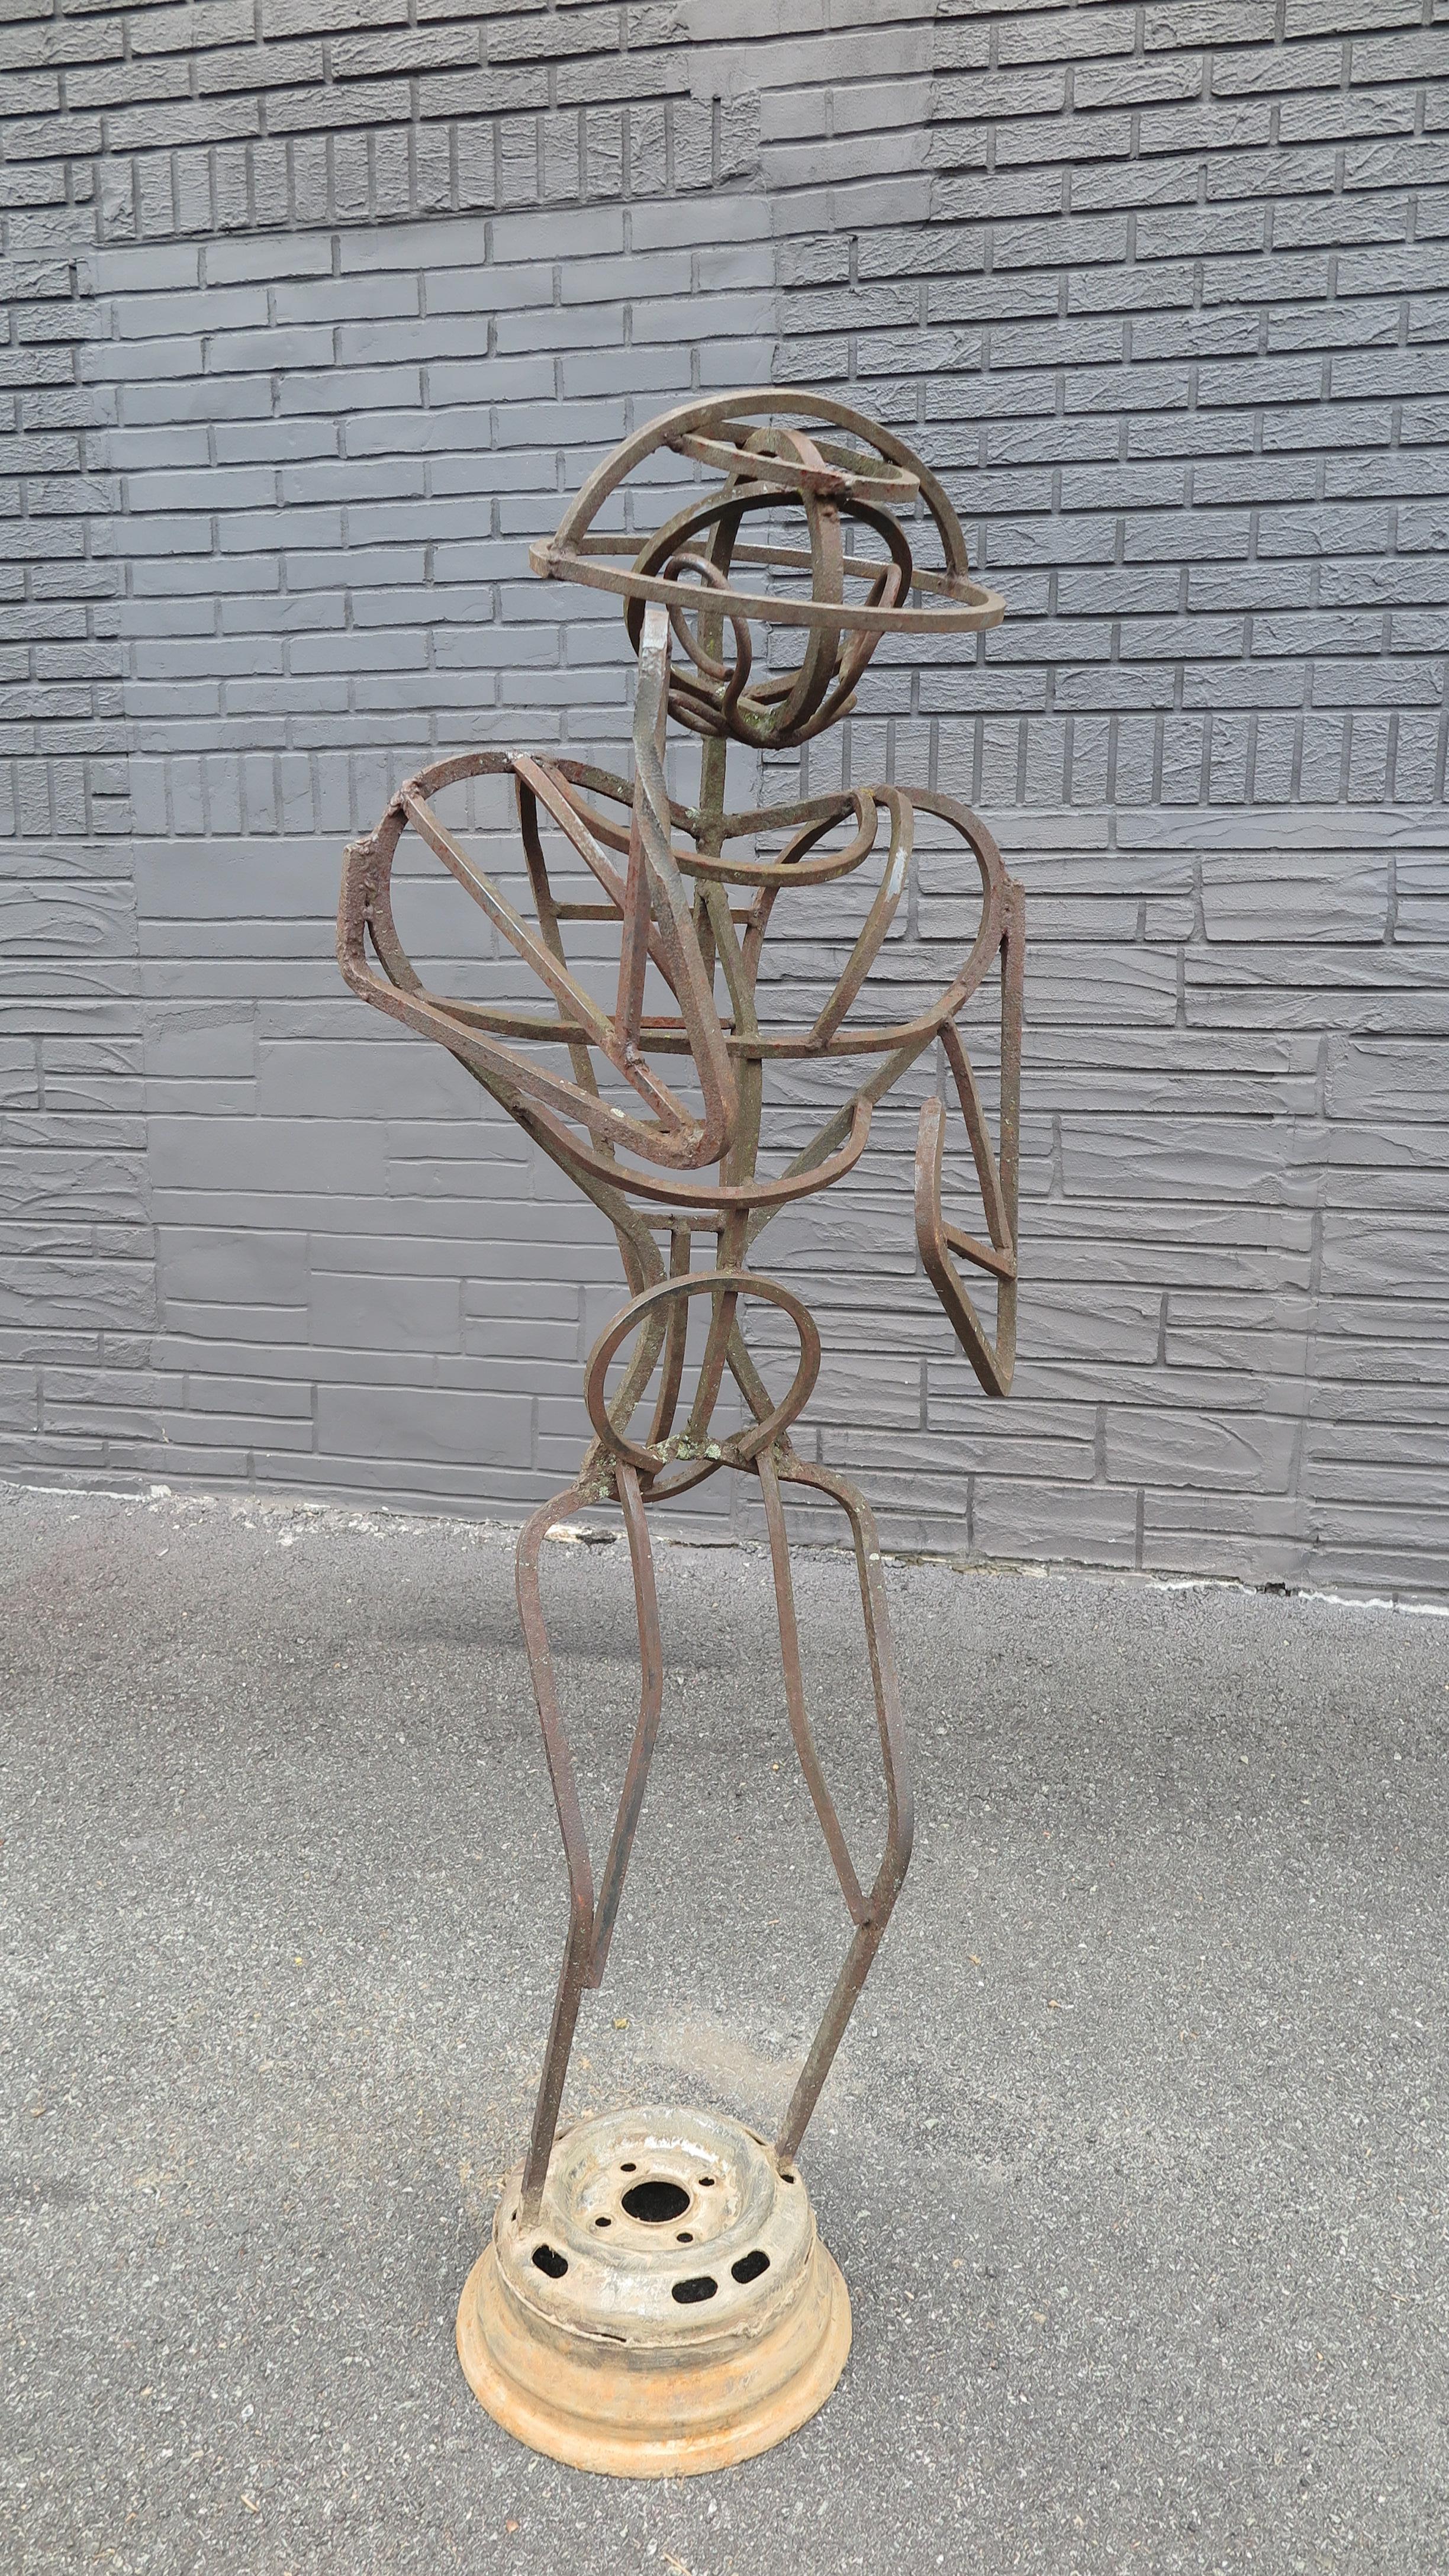 Metal Bee Keeper sculpture by A.R. Gately, noted American Folk Artist. A outdoor Bee Keeper Sculpture made of metal bar and metal parts. A life size outdoor Sculpture that will enhance your outdoor space while presenting American Folk Art. A.R.